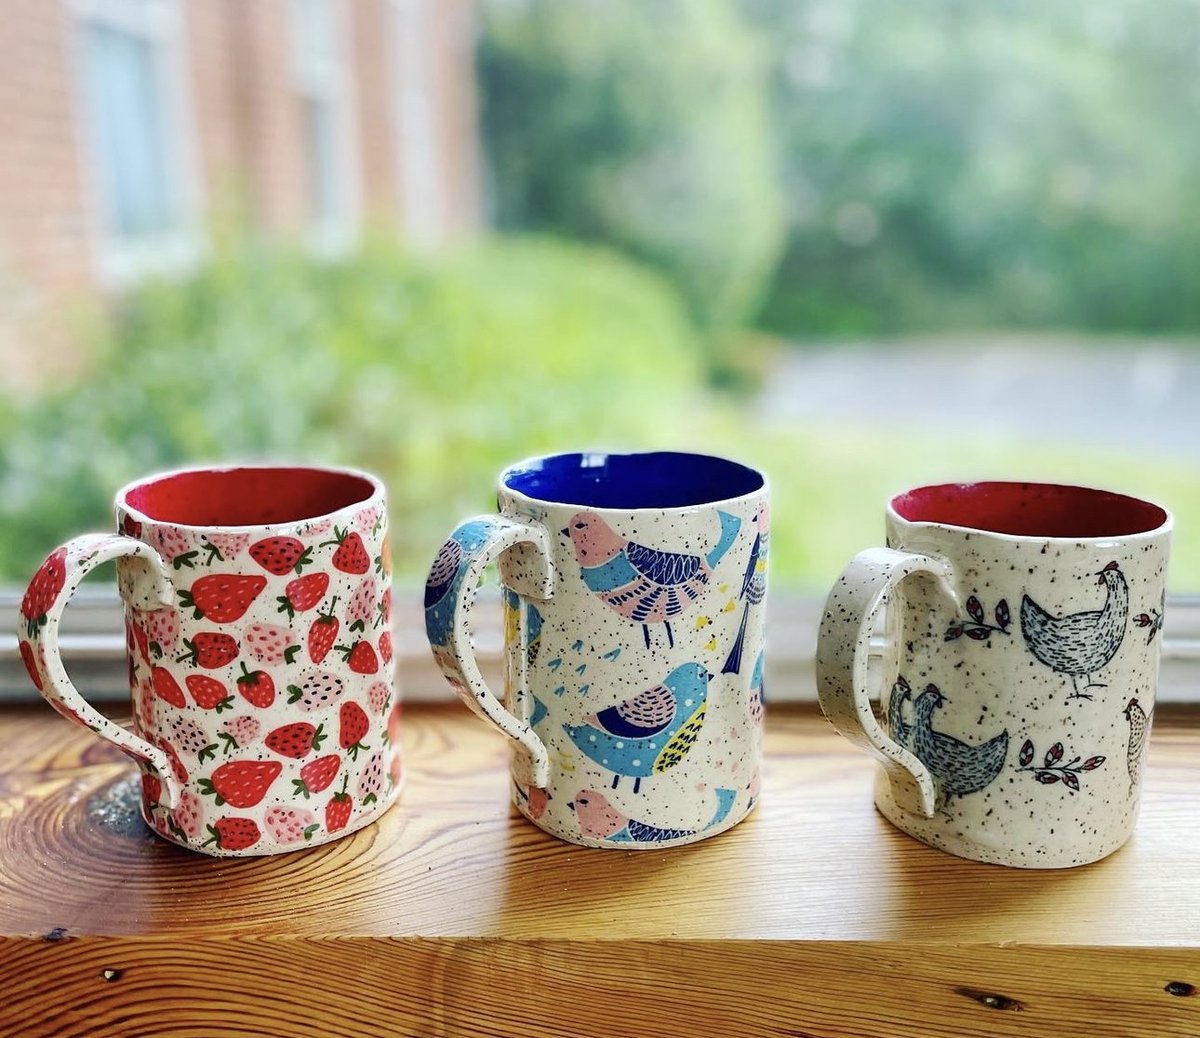 MOTHER'S DAY is coming up, and we have the perfect gift idea.🫶🏼 @cityclay is an art studio in Charlottesville that offers classes and supplies for you to make the perfect clay piece for mom... or, just for fun! To learn more, about @cityclay go to cityclaycville.com.